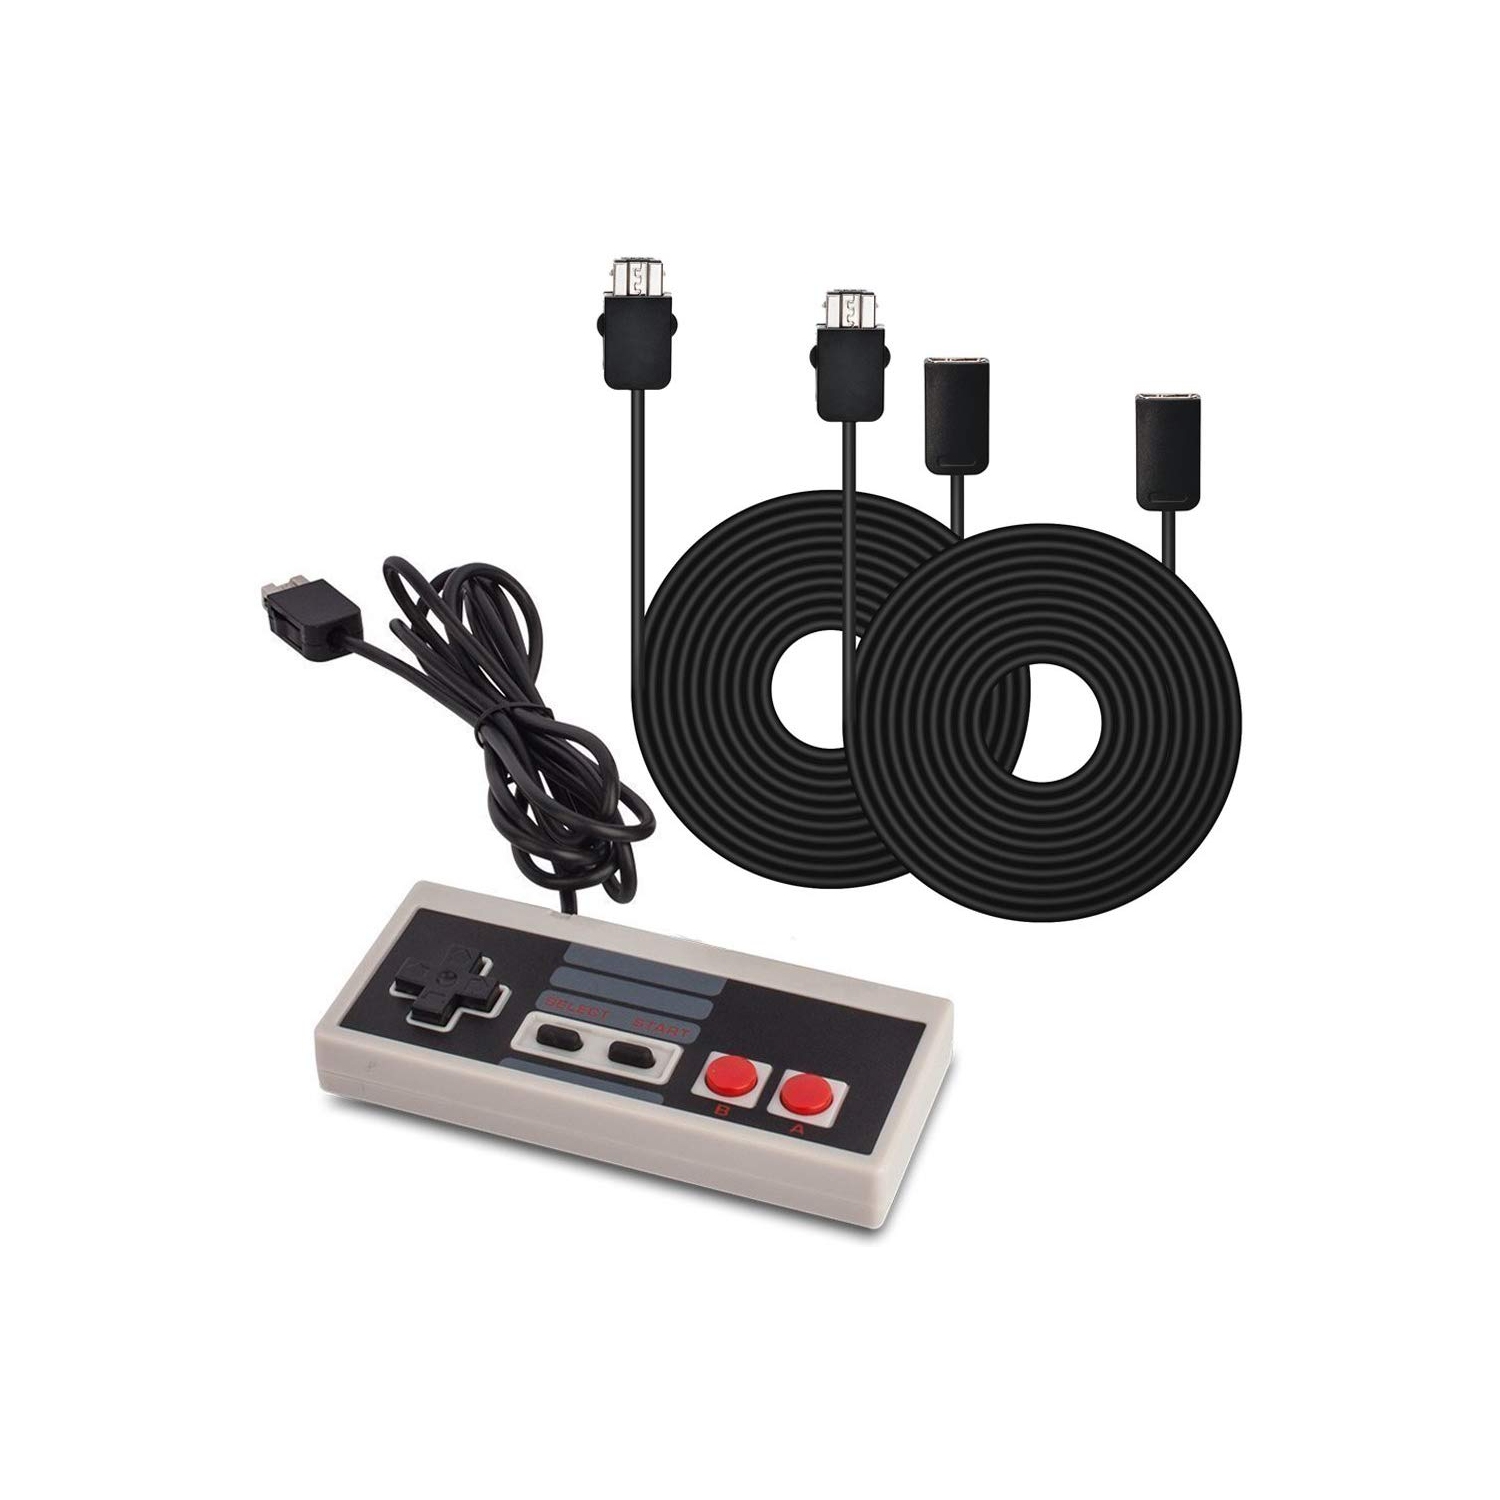 AGPtek® Controller For Nintendo NES Classic Mini Edition Controller Gamepad and 2pcc*9.84Ft Extension Cables